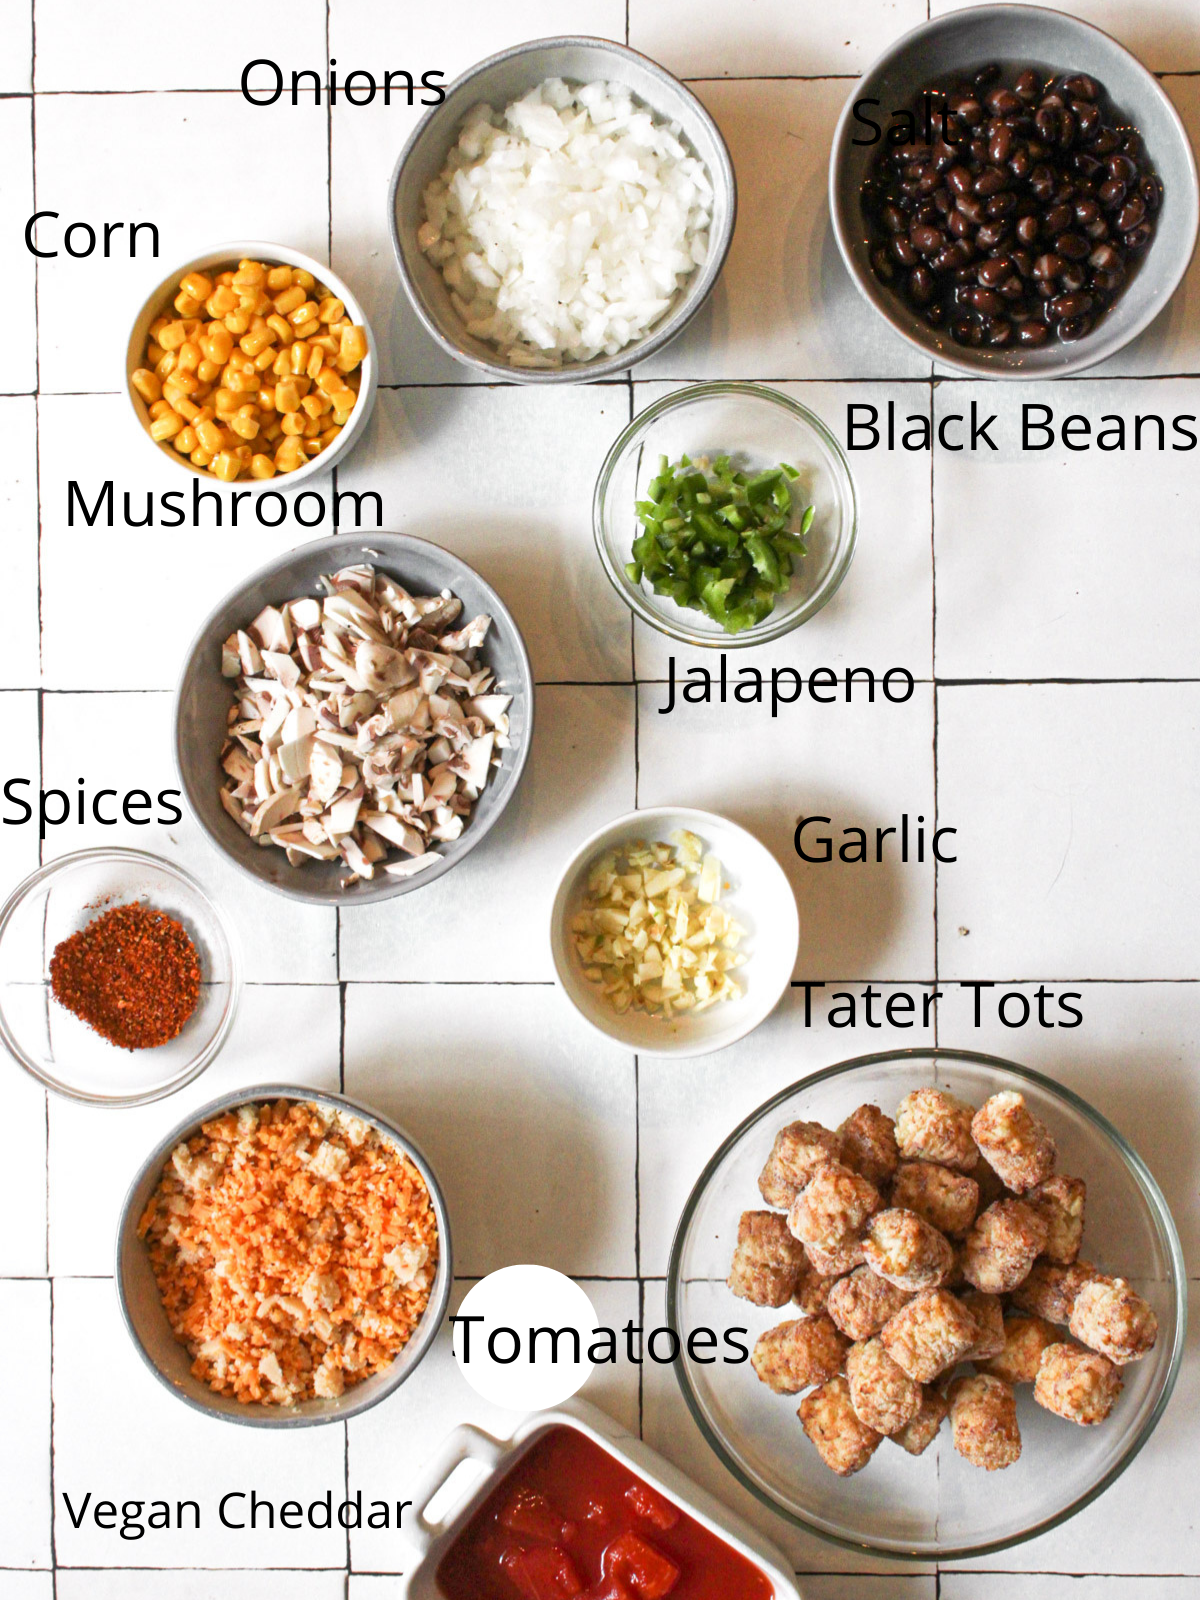 ingredients needed for vegan tater tot casserole: onions, corn, black beans, mushrooms, jalapeño, garlic, spices, vegan cheddar, salsa, and tater tots